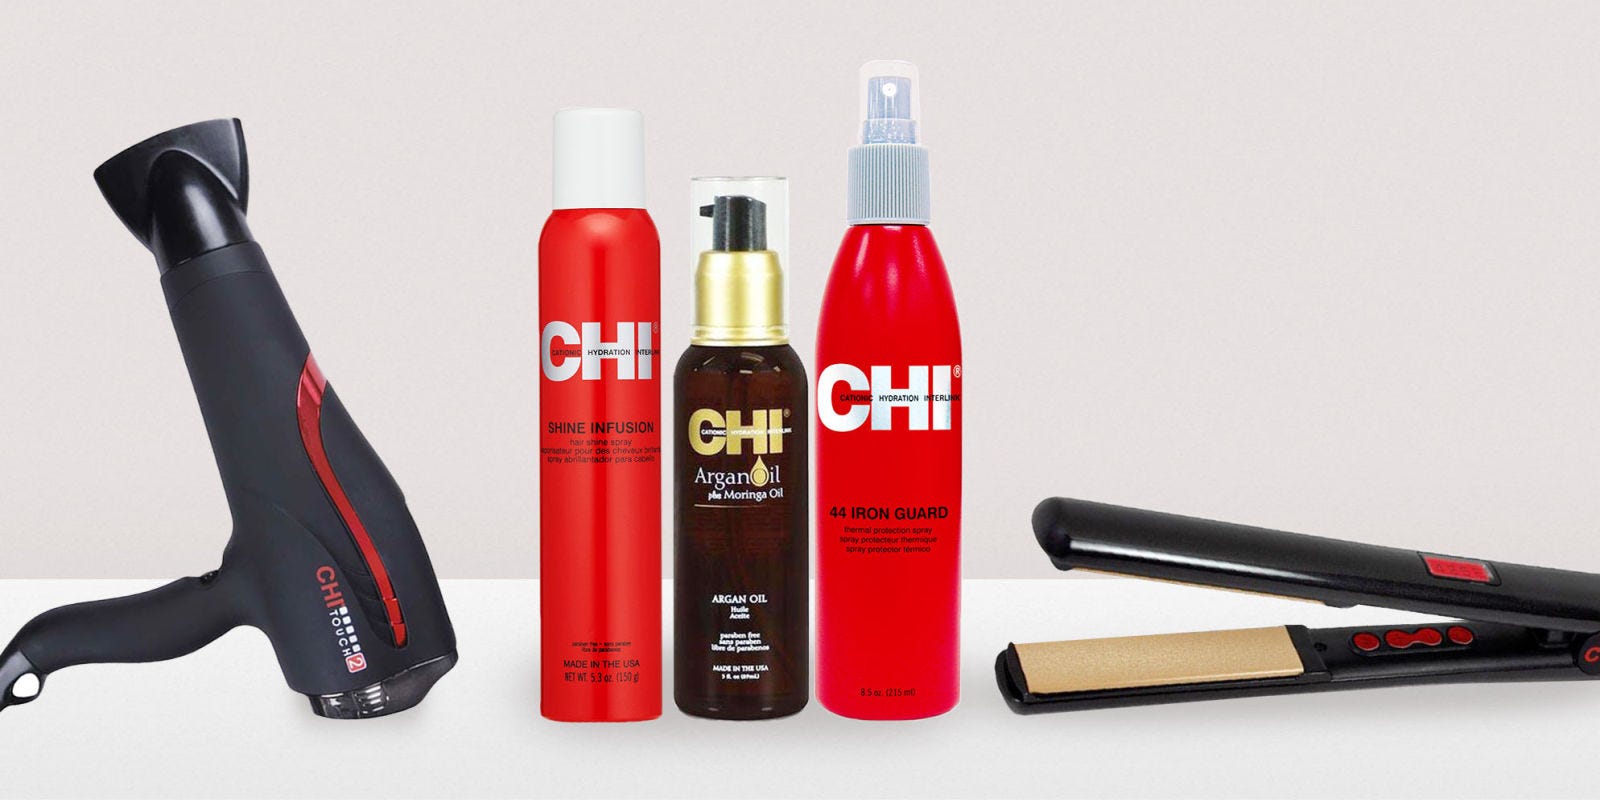 9 Best Chi Hair Products In 2018 Chi Flat Irons Shampoos And Hairspray We Love 1487